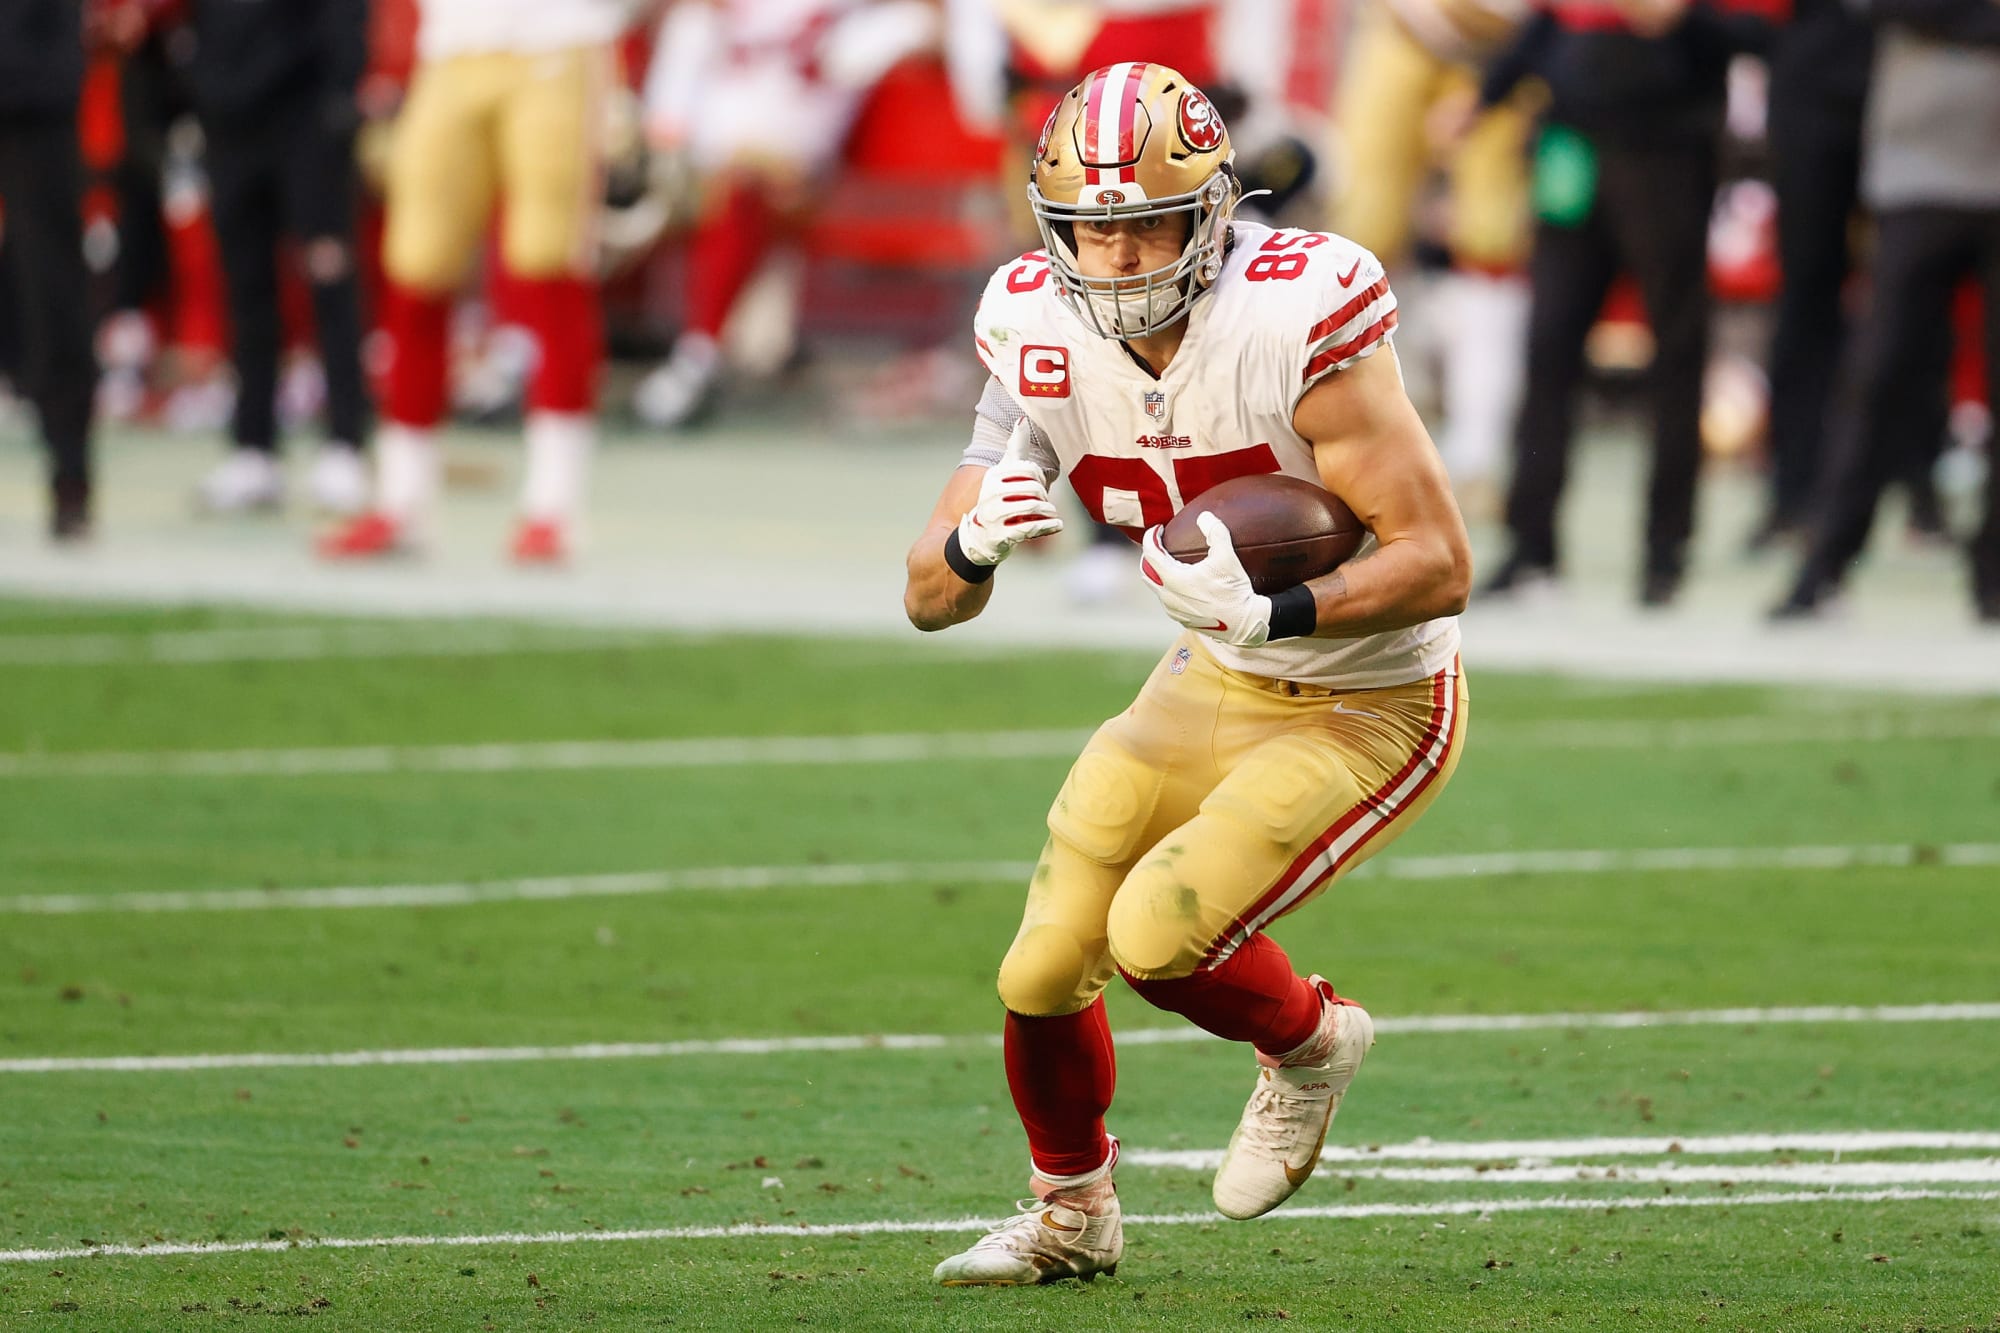 George Kittle has hilarious 49ers schedule reveal (Video)